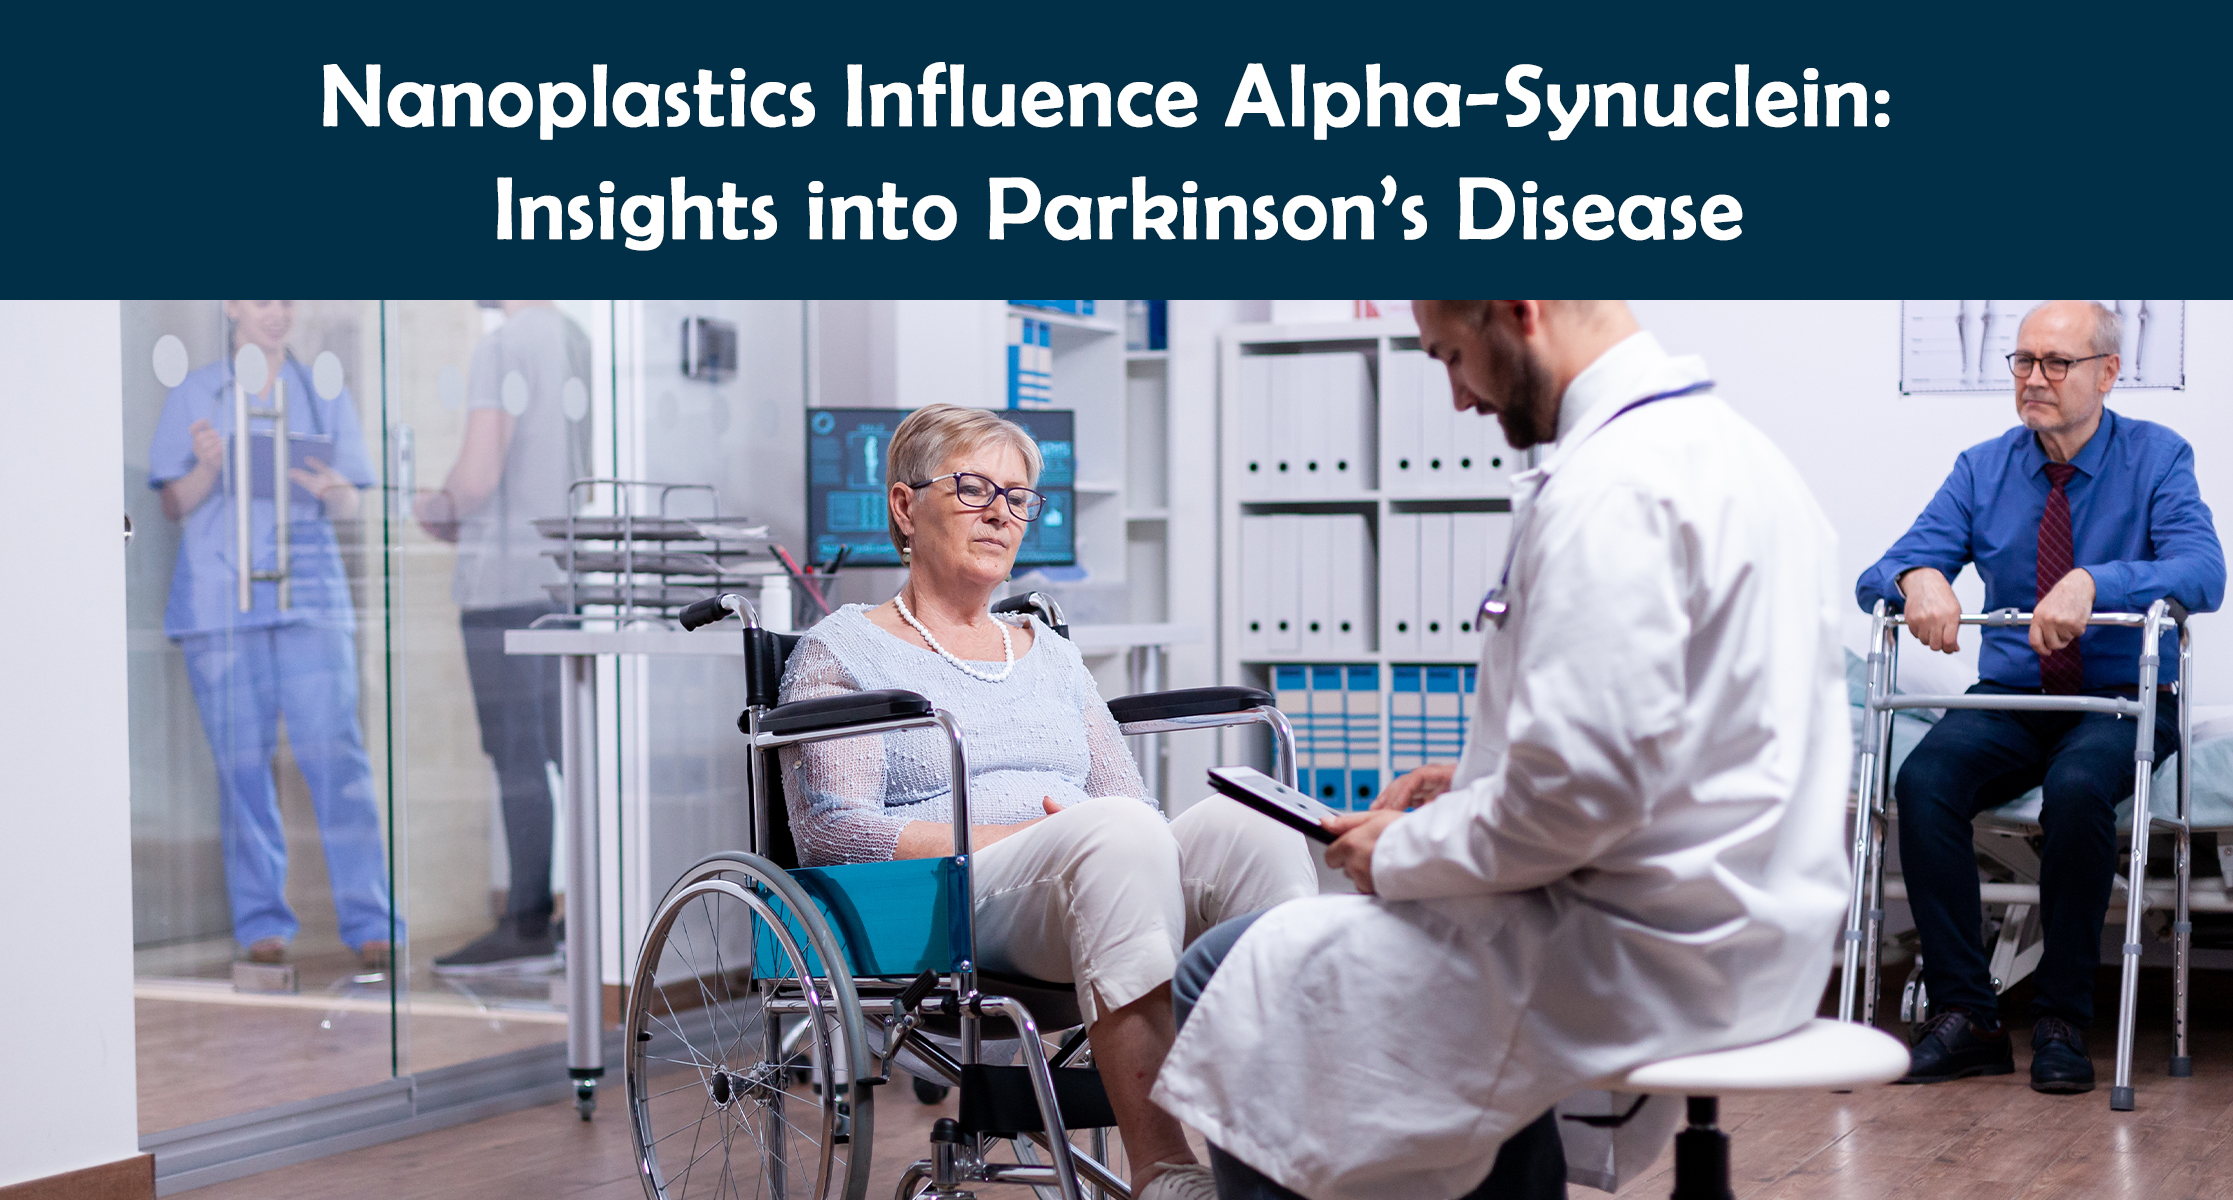 Nanoplastics Influence Alpha-Synuclein: Insights into Parkinson’s Disease